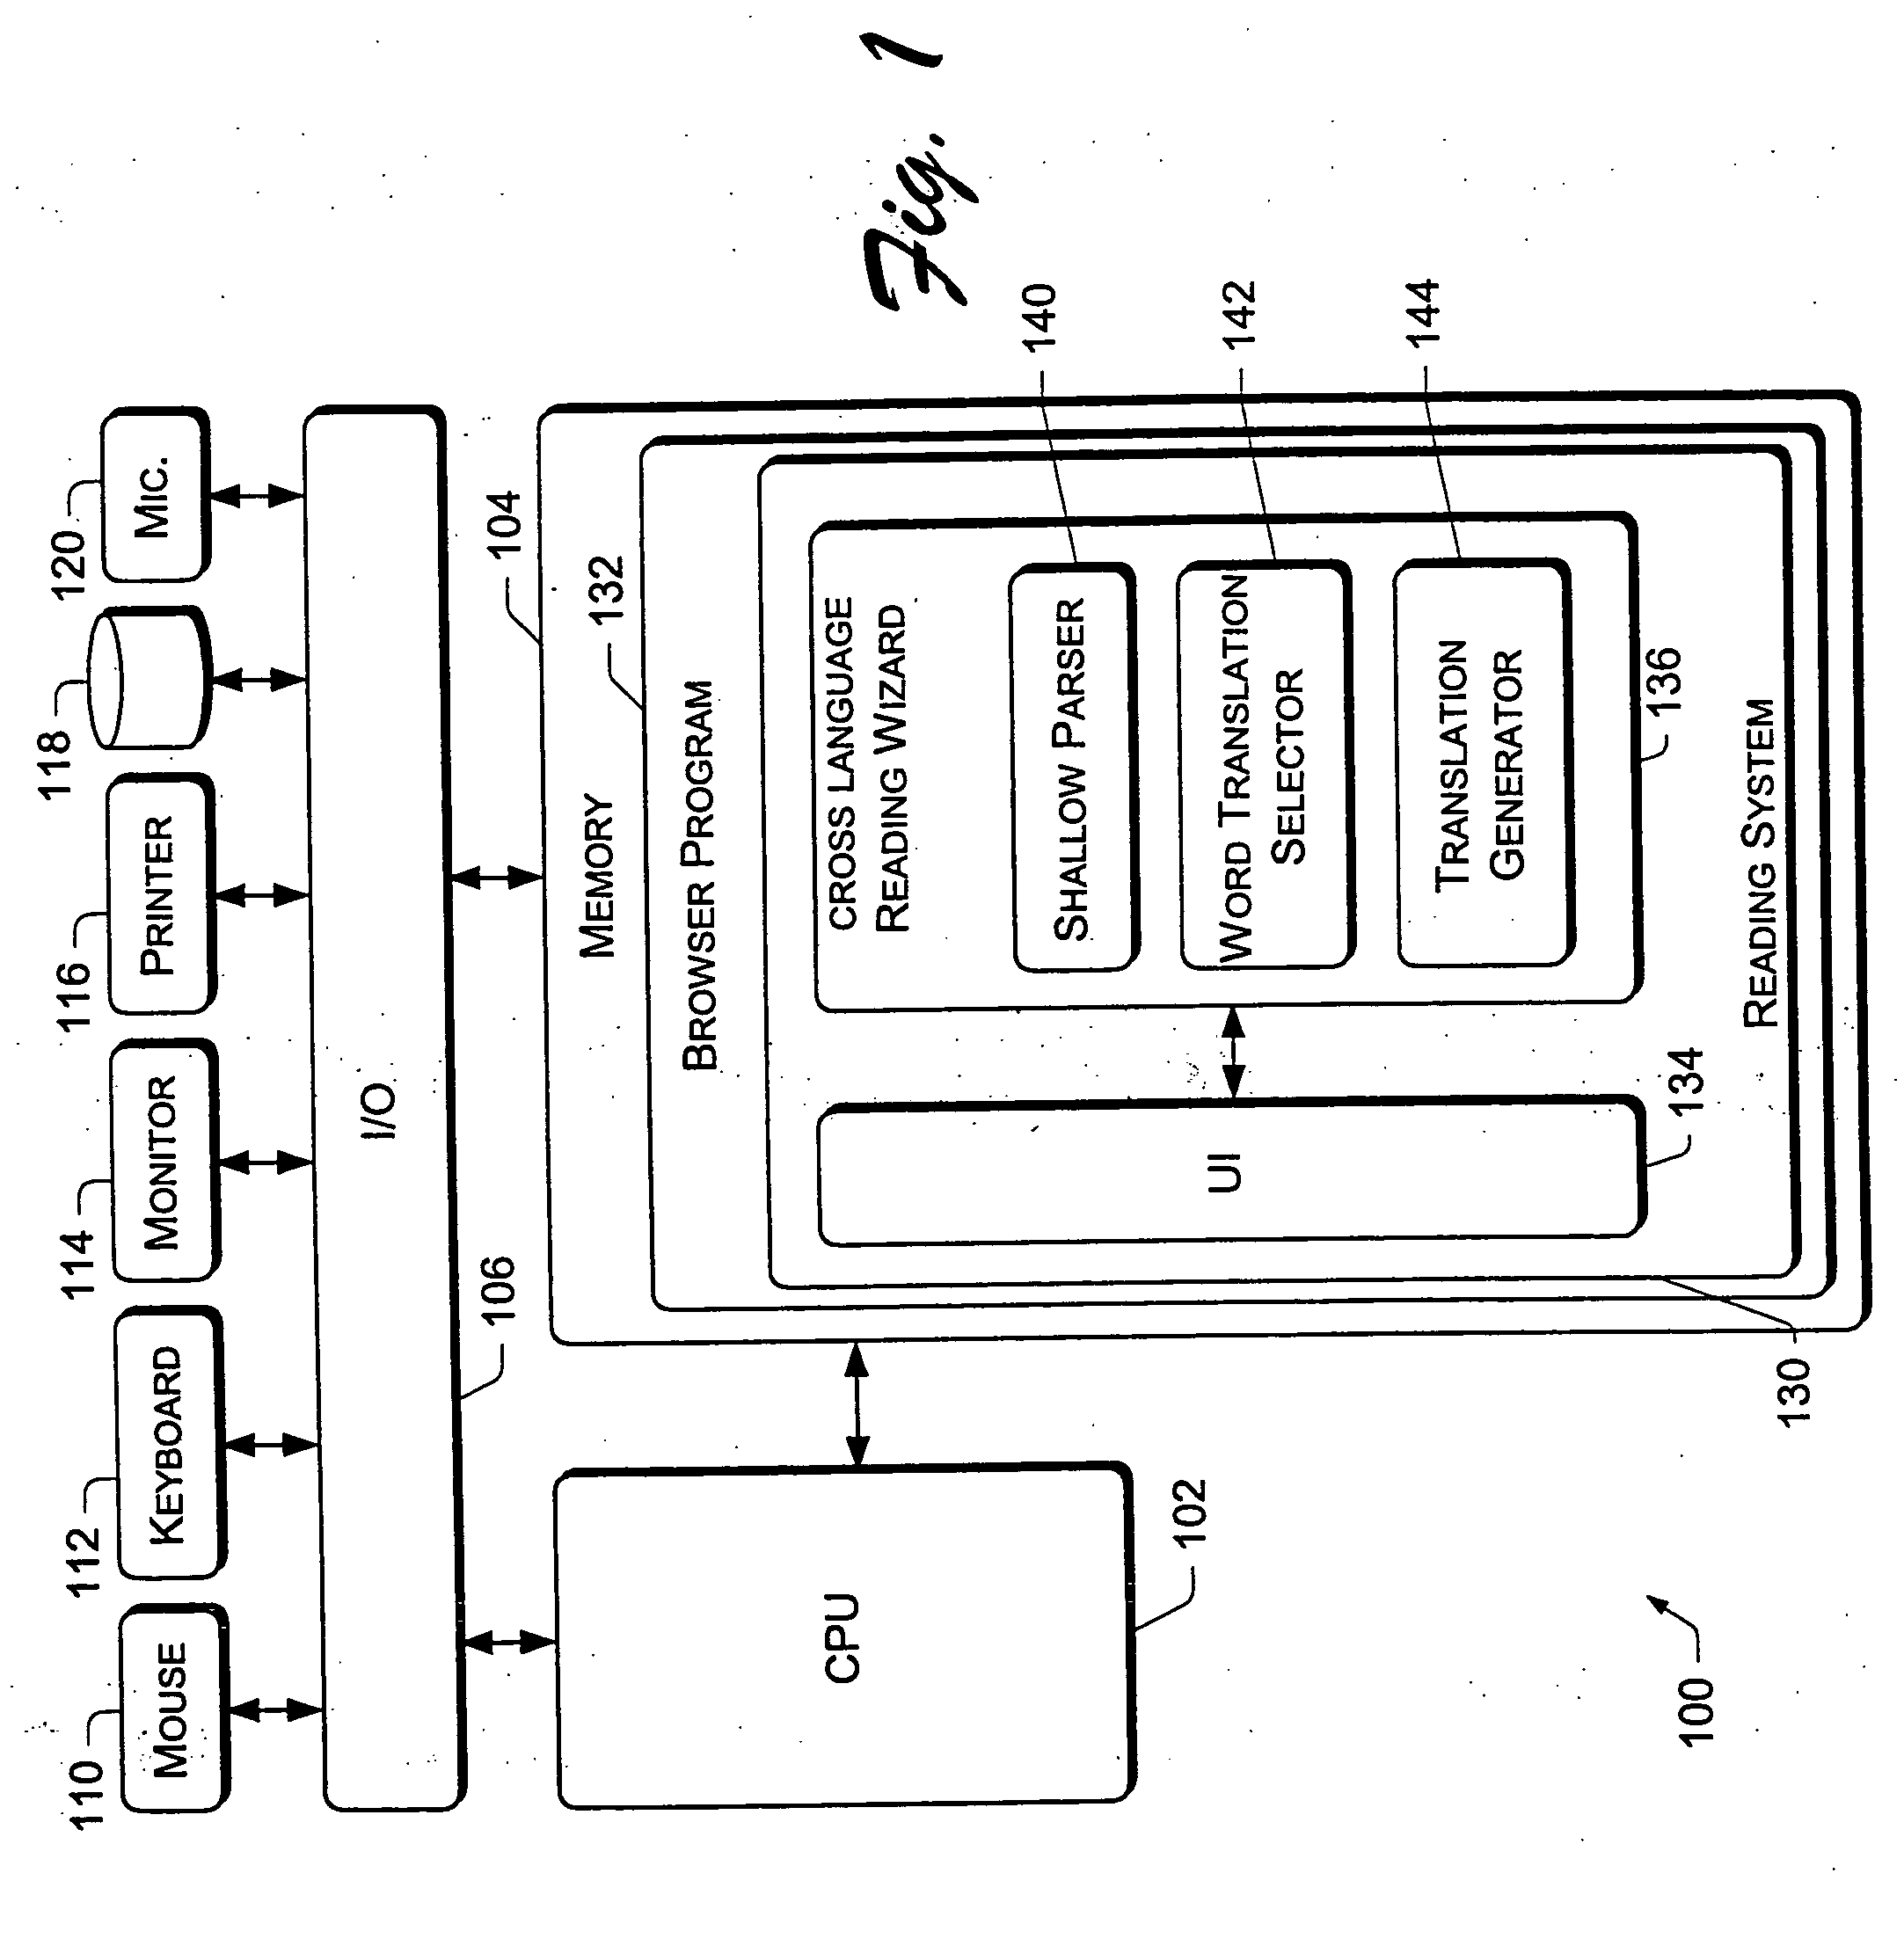 Computer-aided reading system and method with cross-language reading wizard